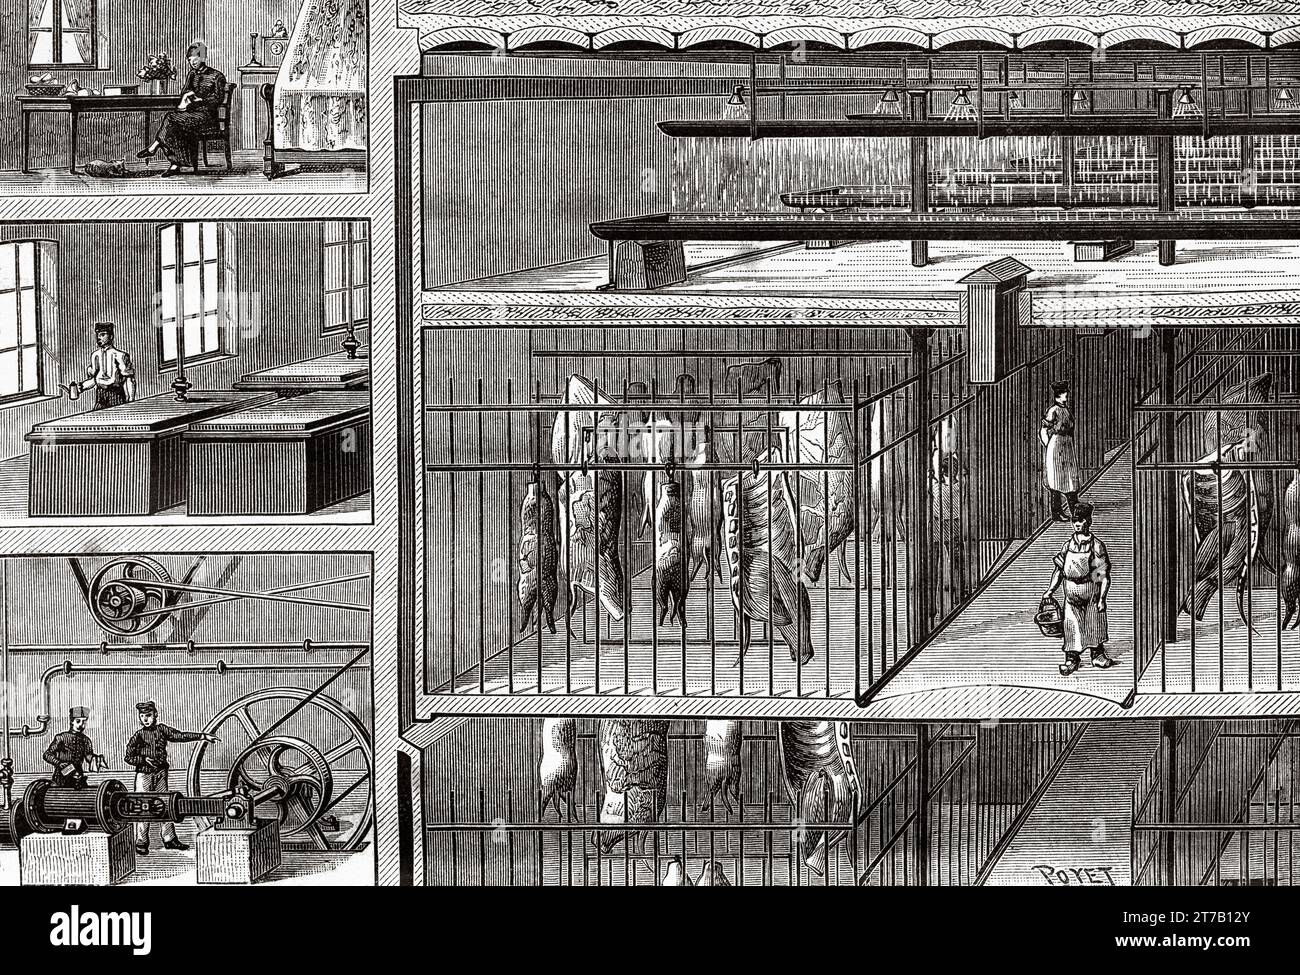 A Schroeder system cold storage warehouse. Old illustration by Louis Poyet (1846-1913) from La Nature 1887 Stock Photo